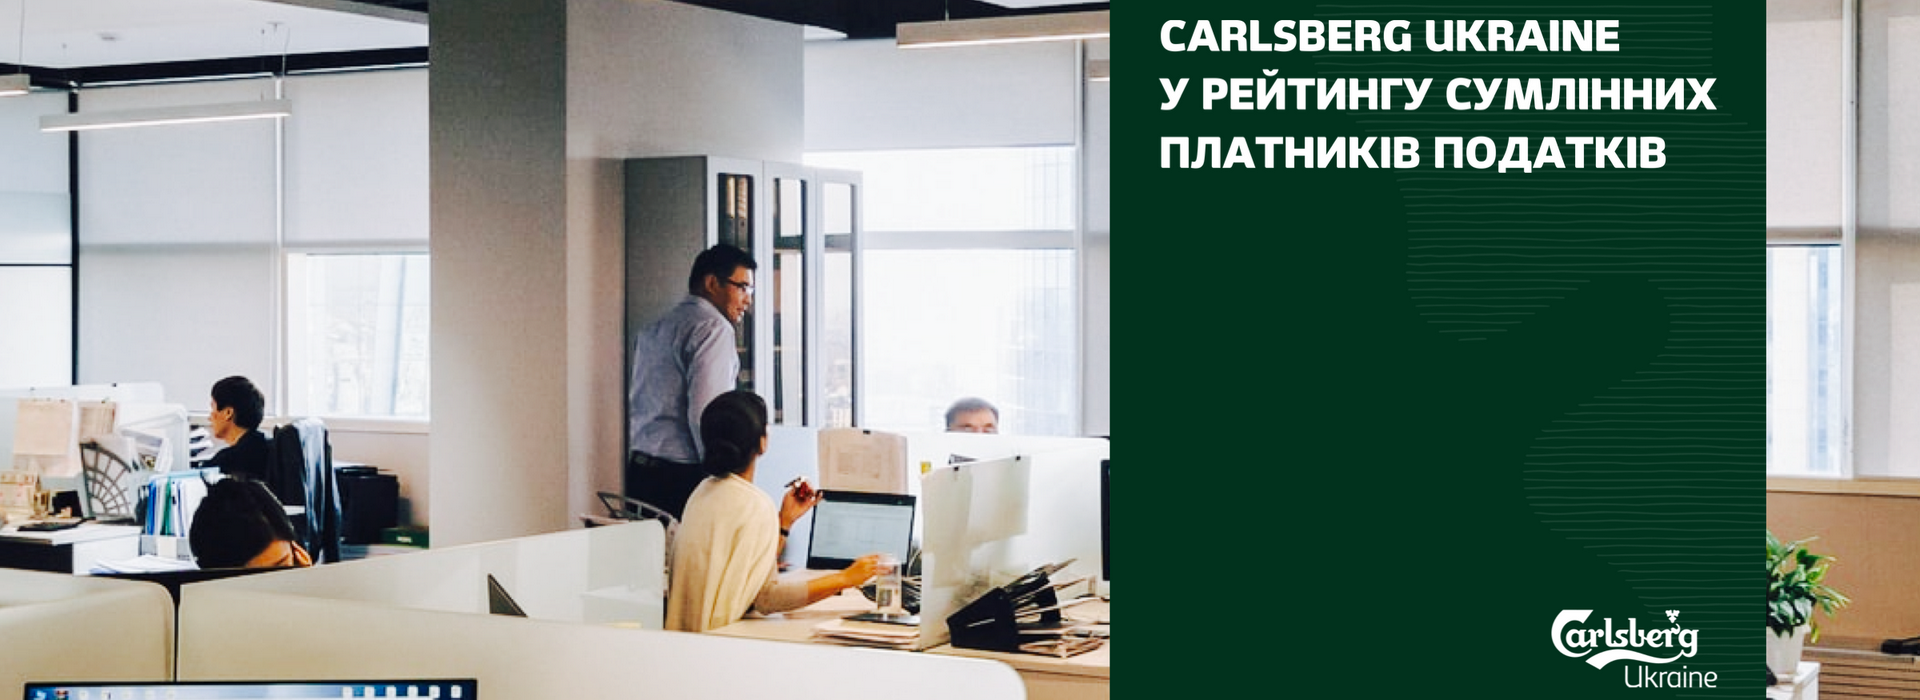 Carlsberg Ukraine Has Once Again Received an Award in the Rating of Honest Taxpayers